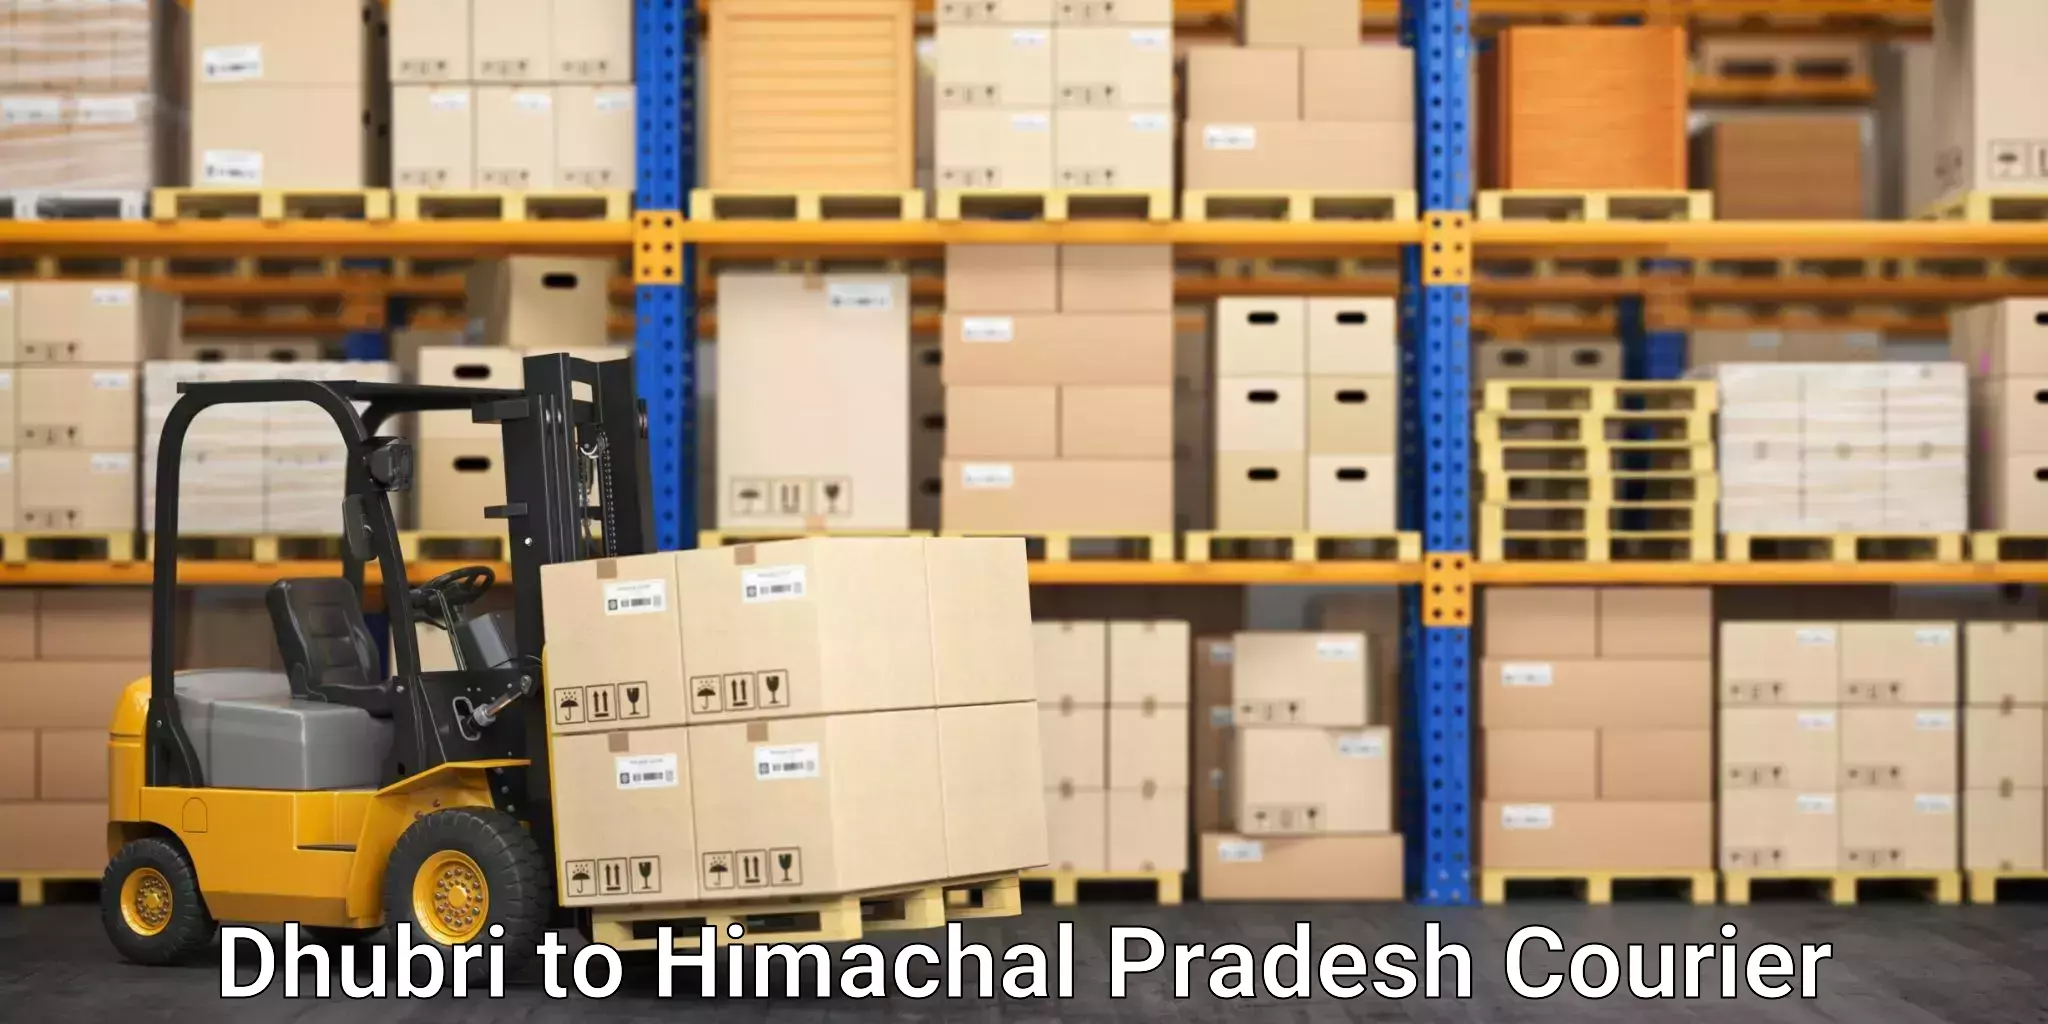 Express delivery network in Dhubri to Himachal Pradesh